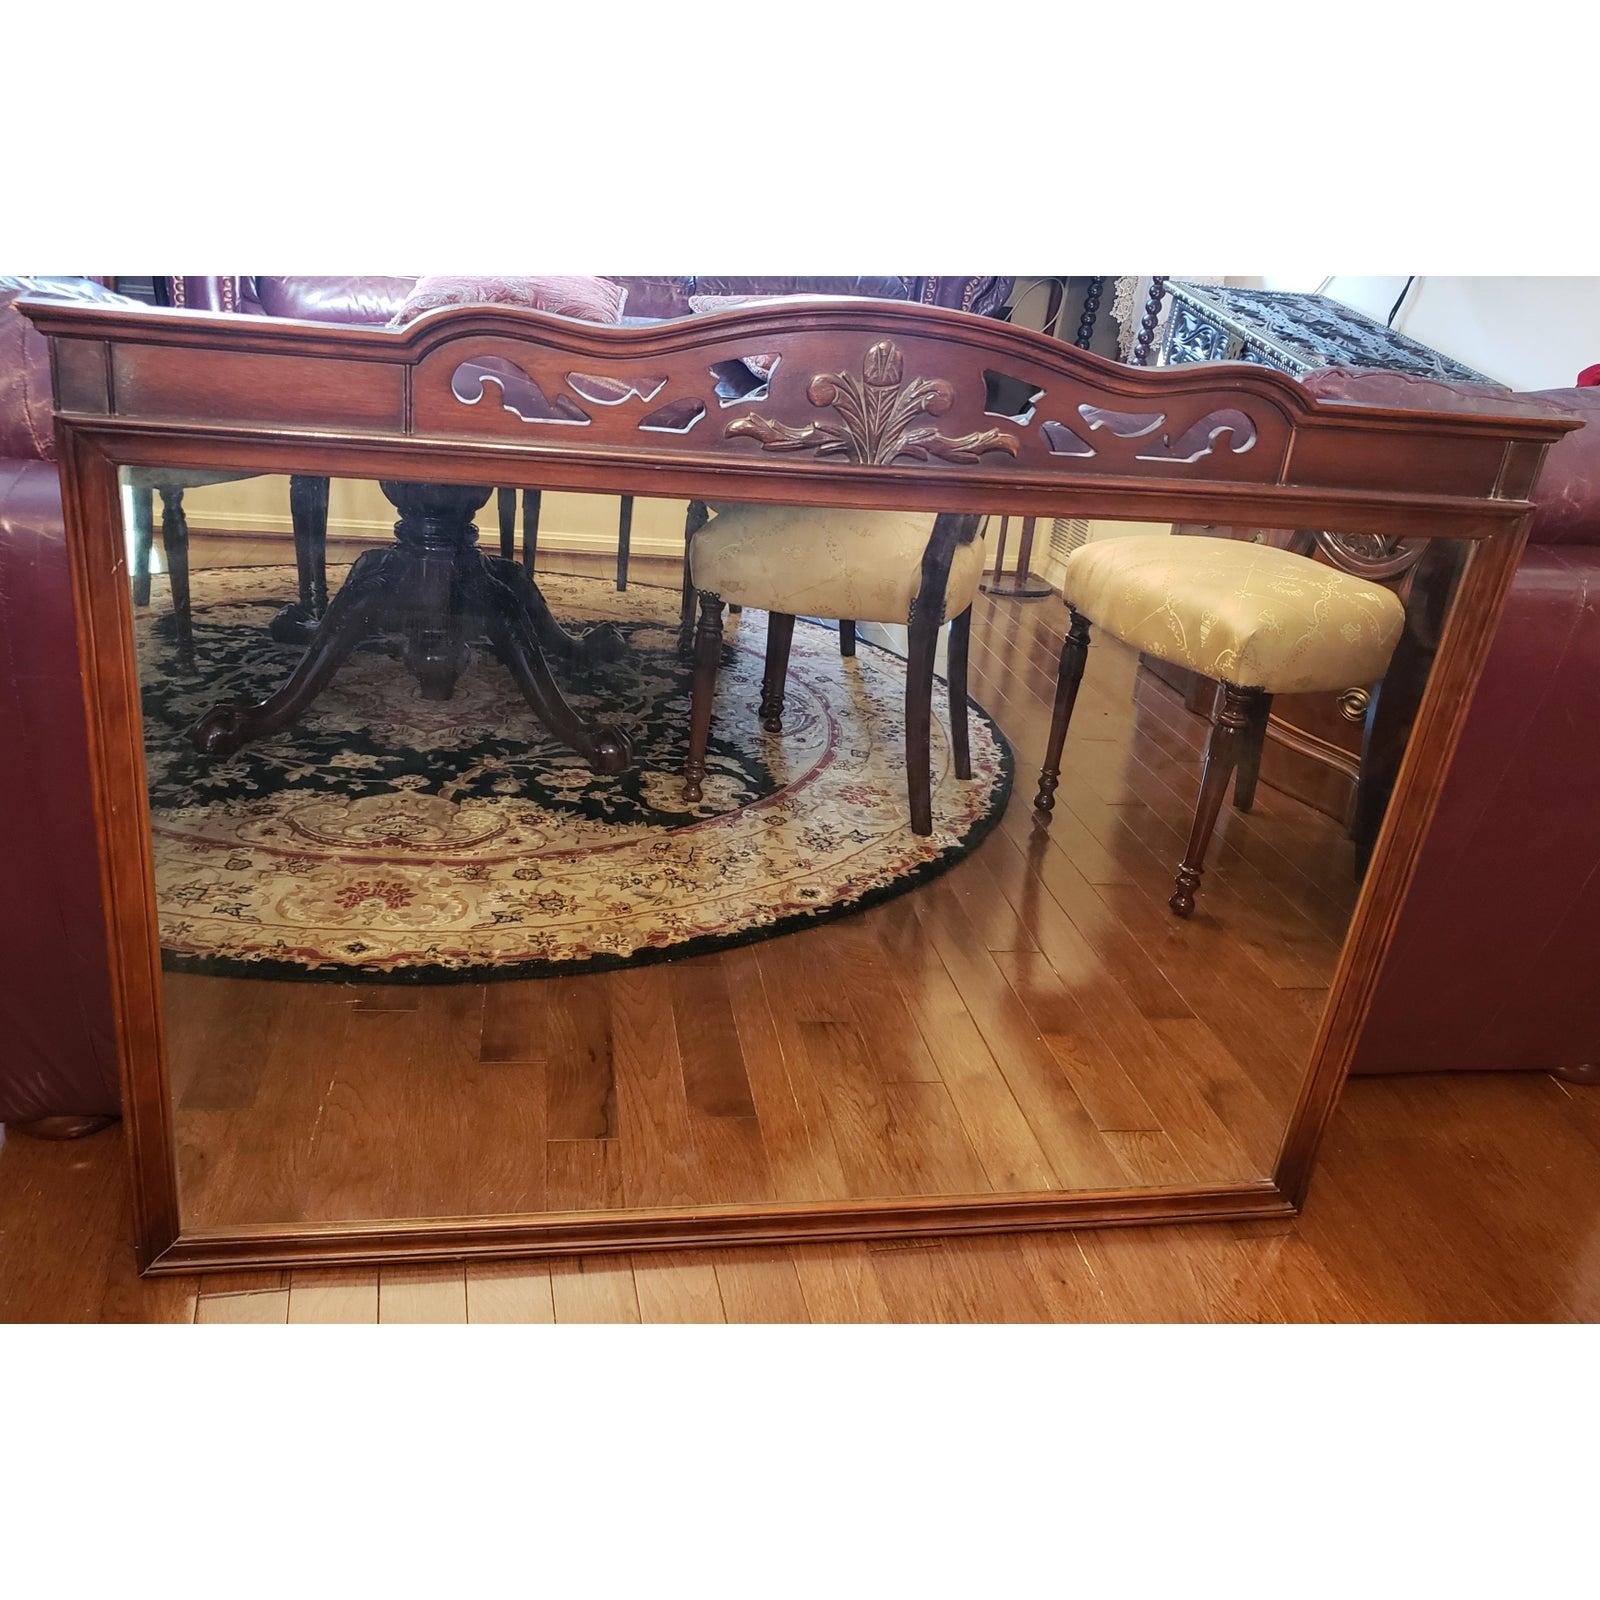 Vintage solid Mahogany wall mirror. Clean carvings on top frame. Lean mahogany frame. Vintage mirror show some signs of aging. Measures 49.5 W x 1.5 D x 37.5 H.
    